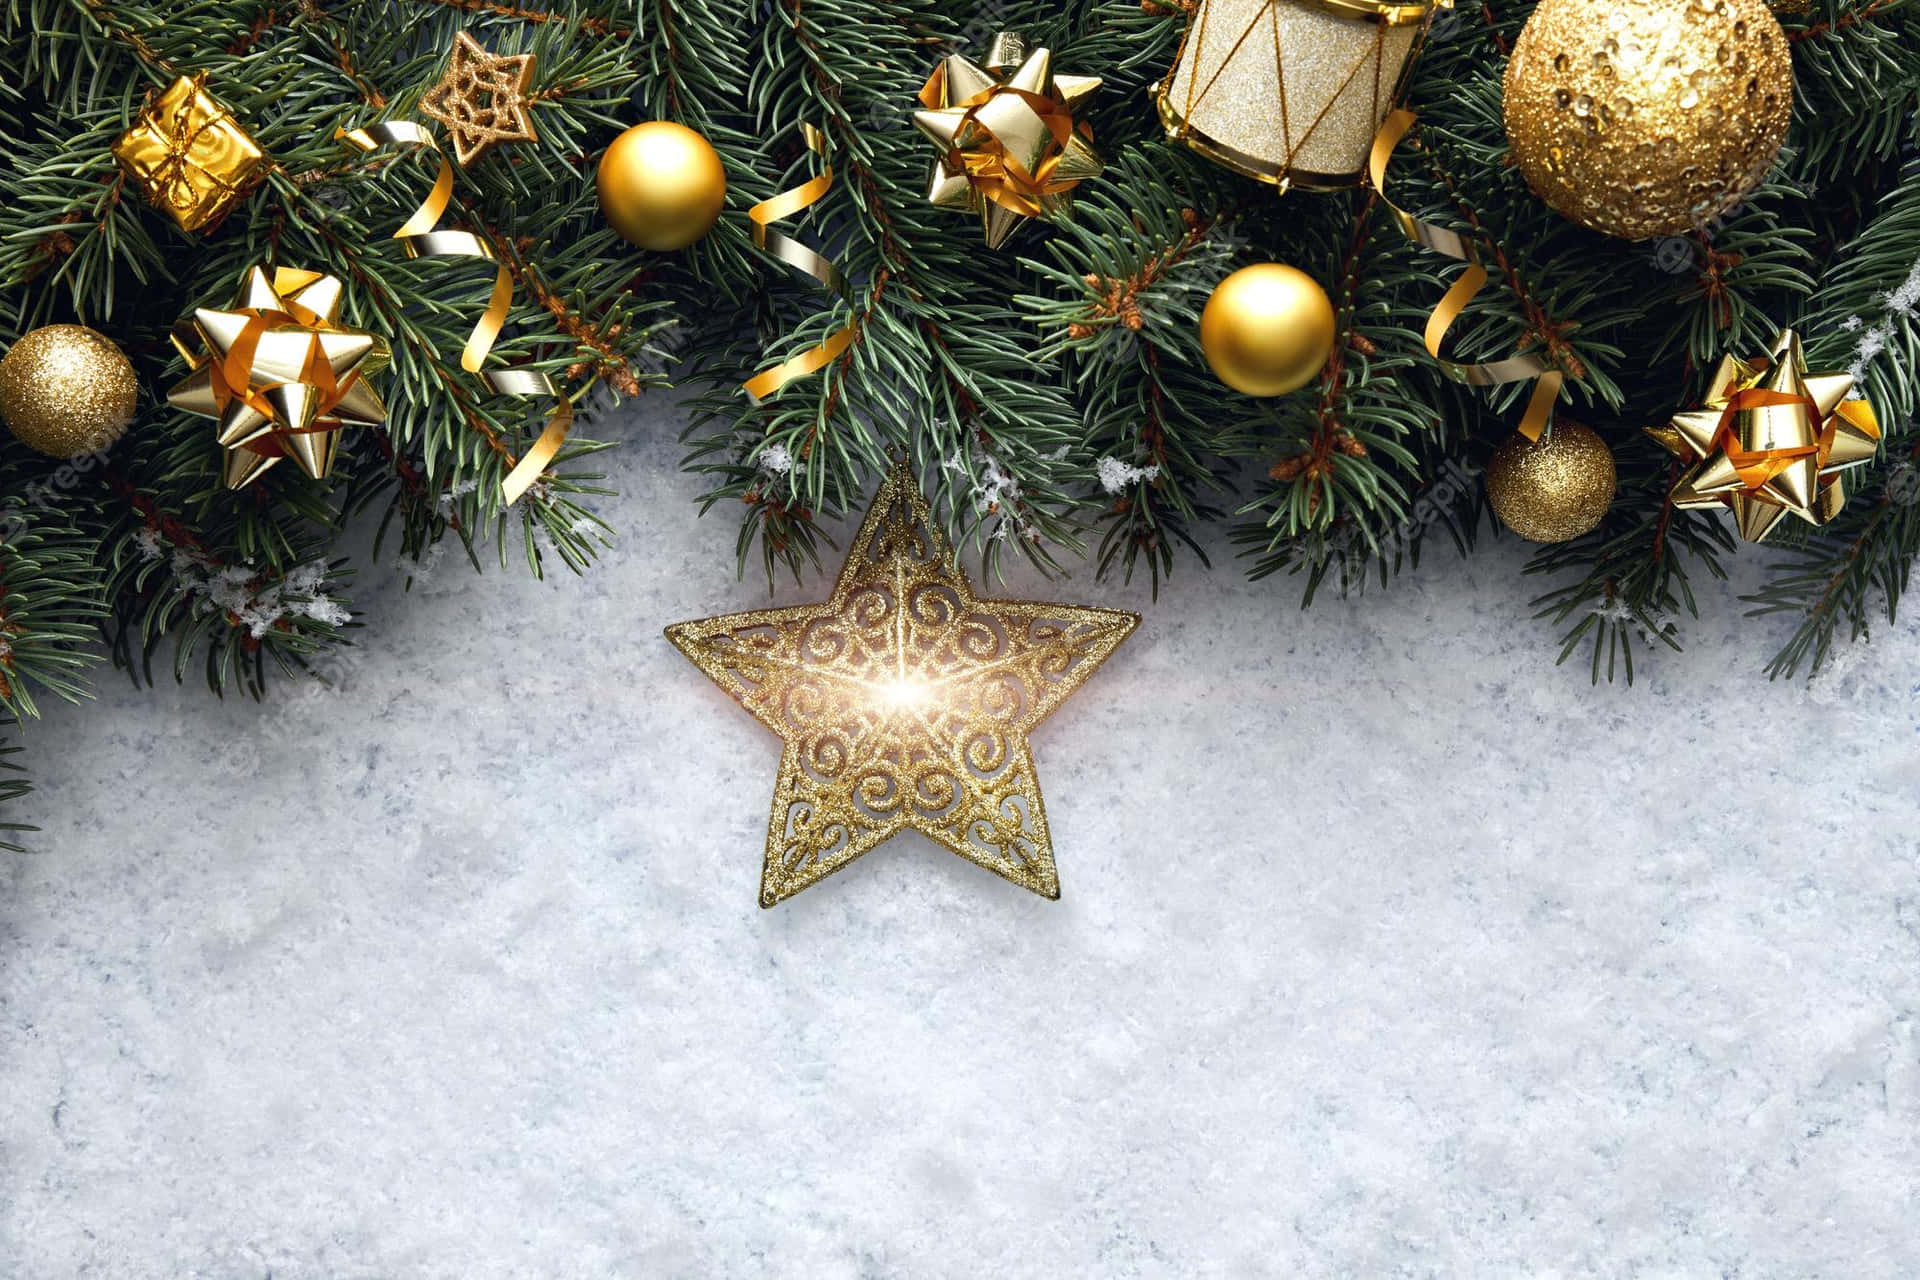 Get Inspired By The Christmas Star Wallpaper